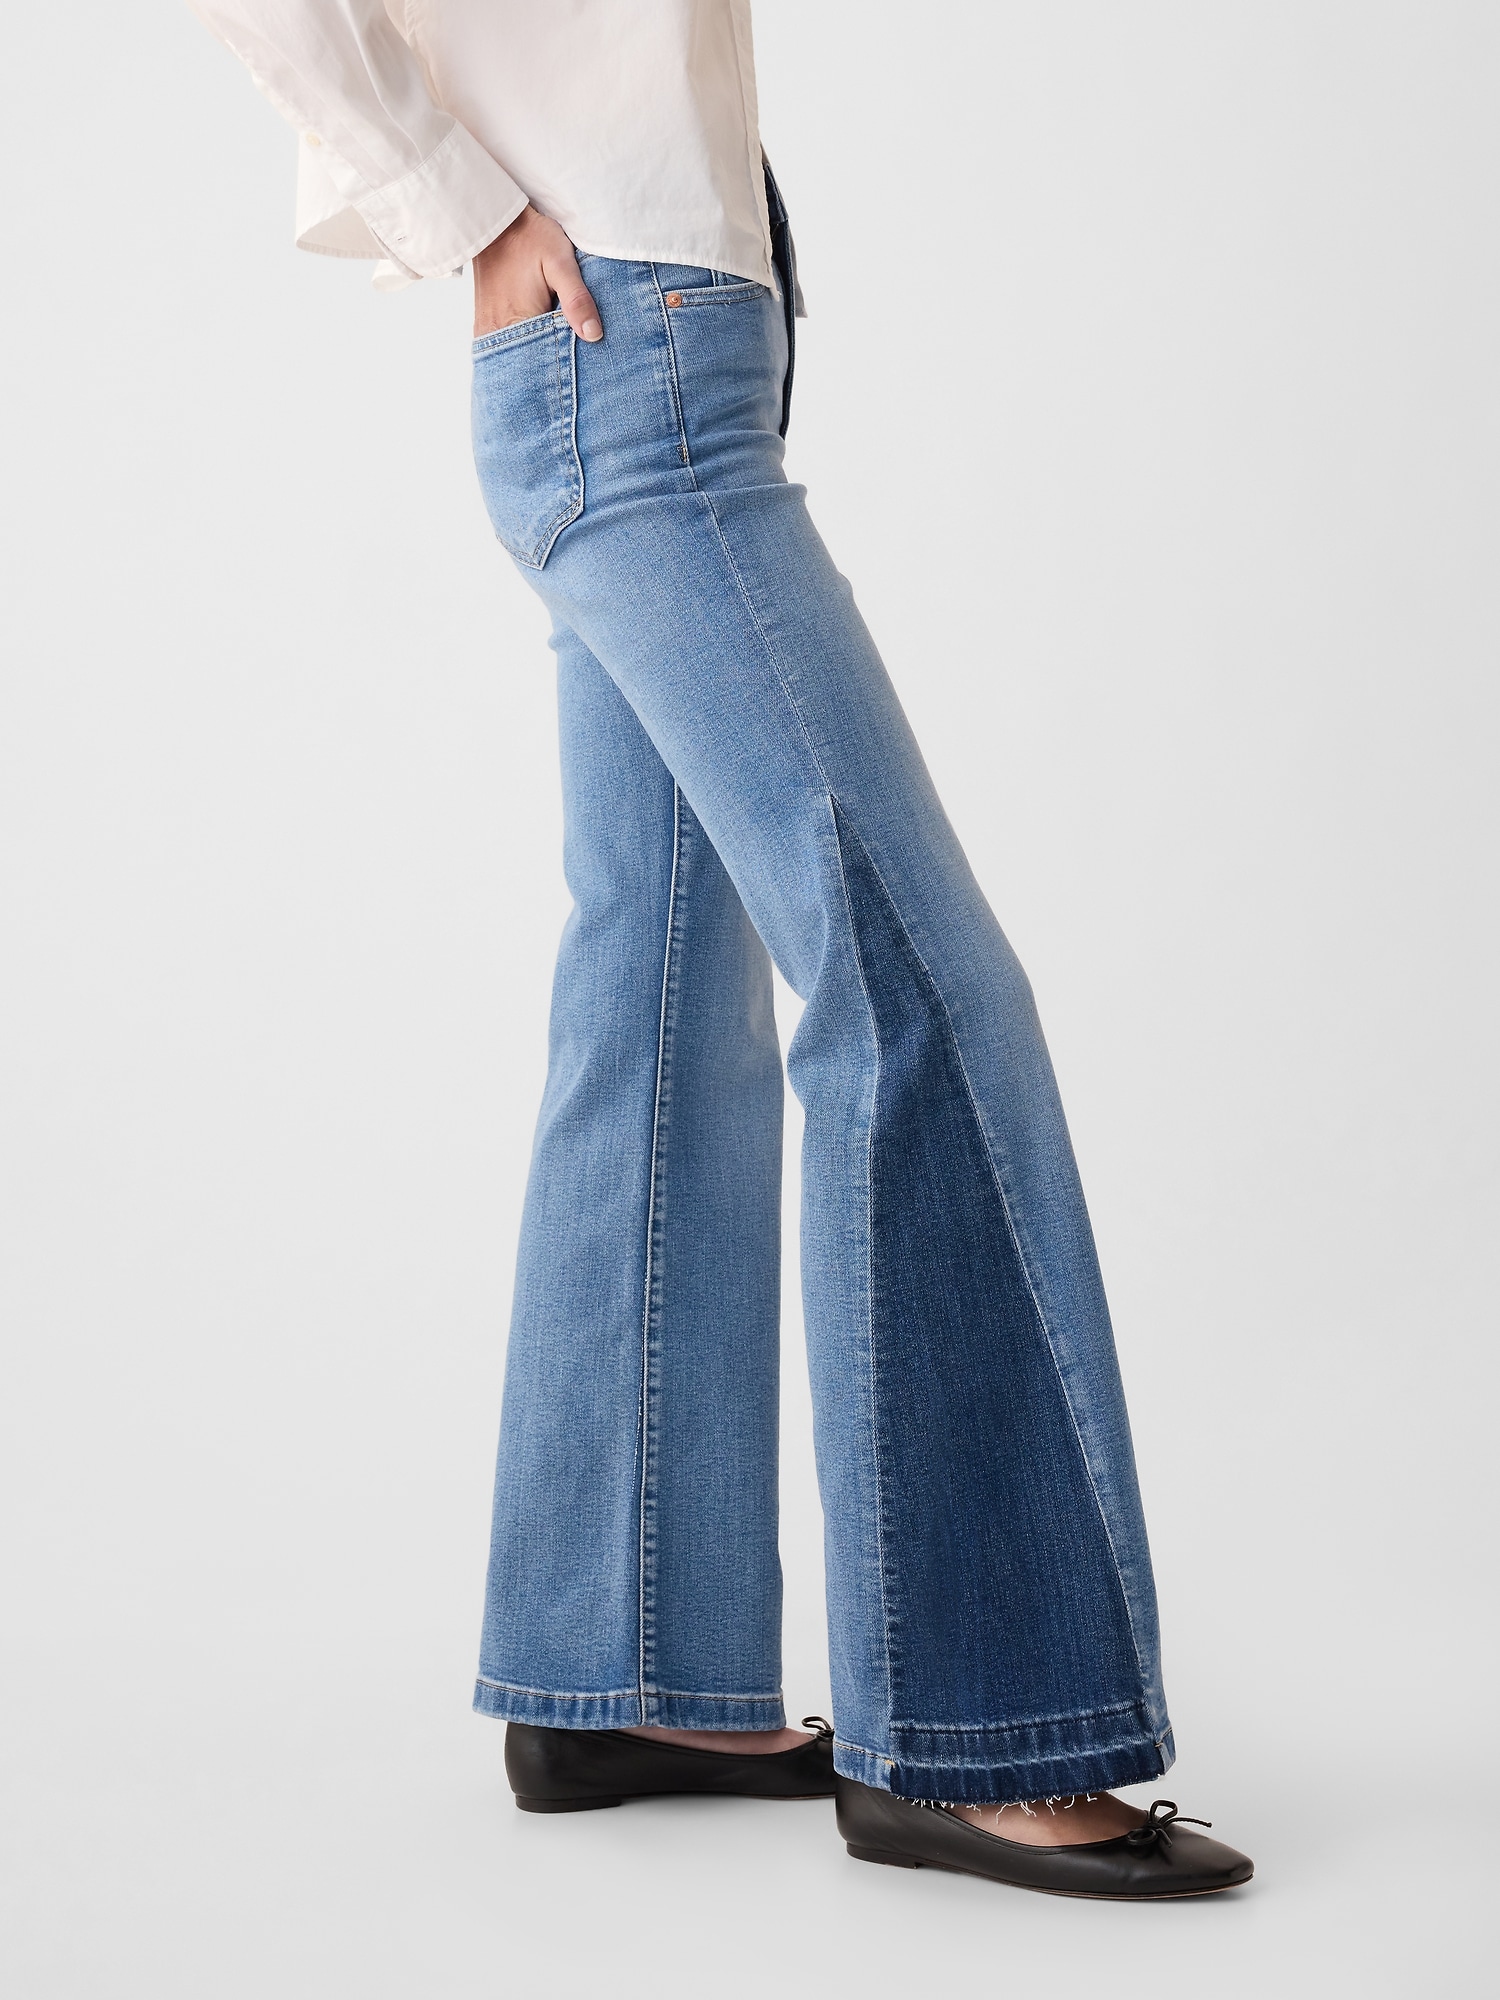 Stylish and Comfortable Women's Gap Flare Jeans